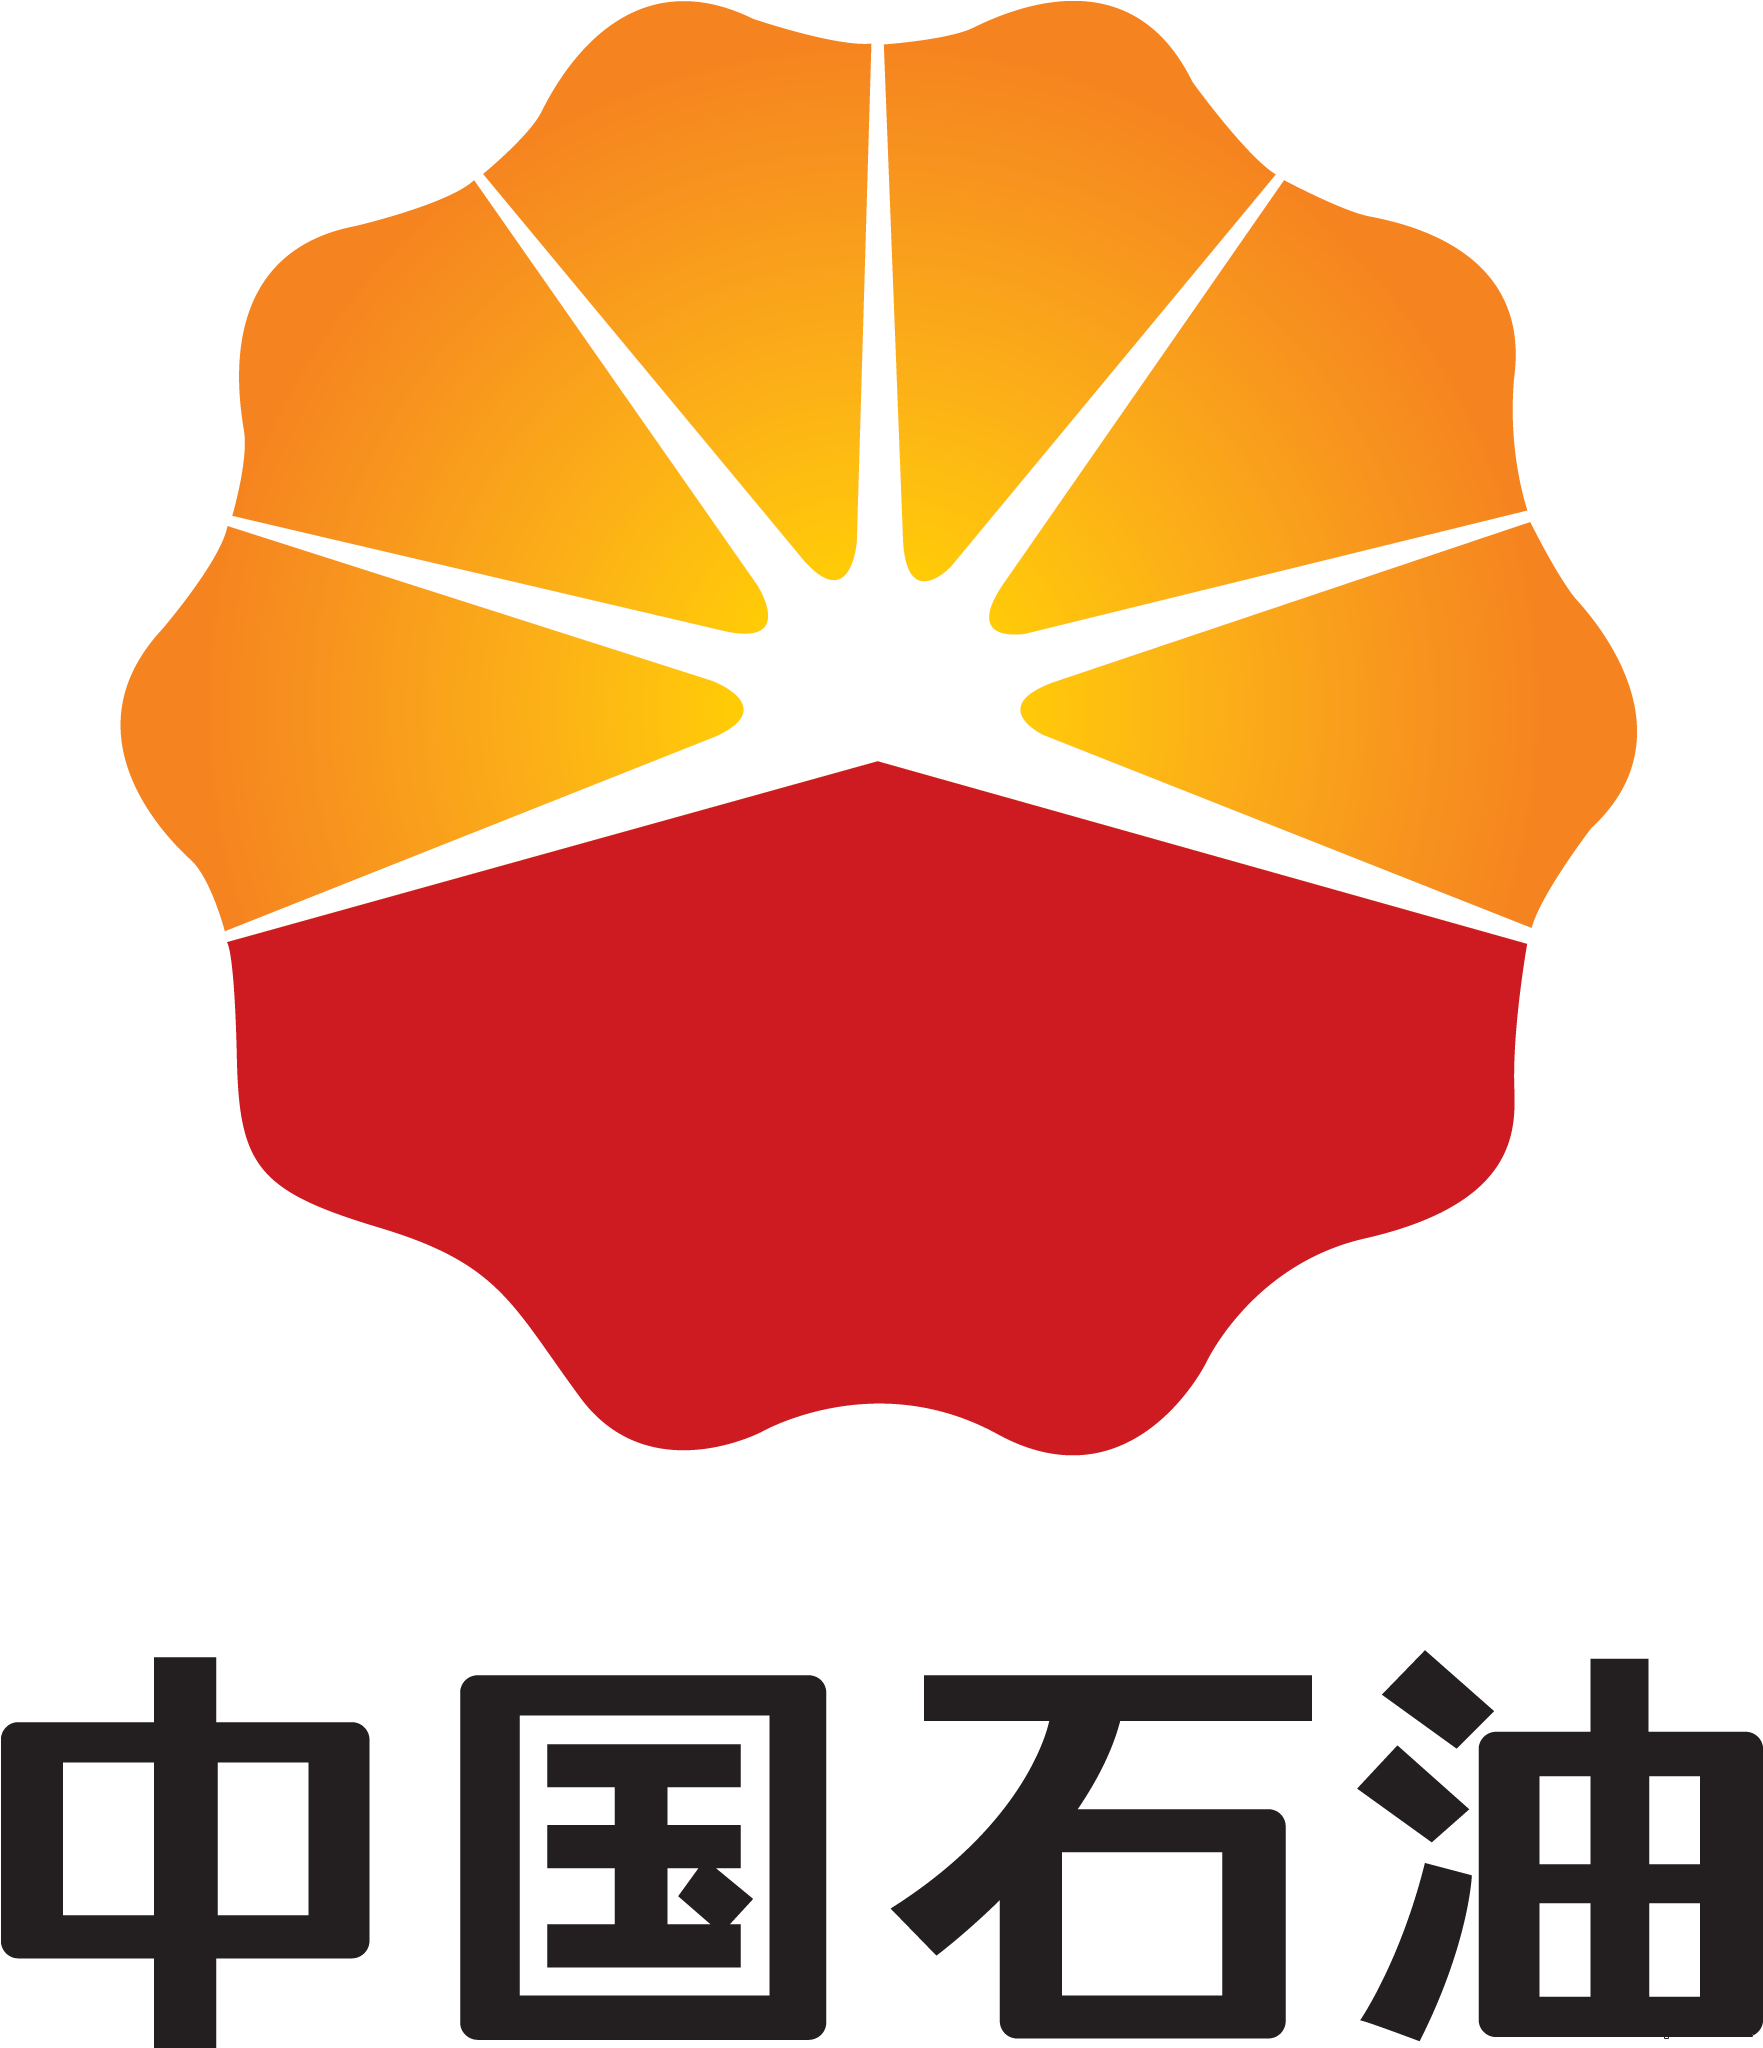 Cnpc Logo And Wordmark - Chinese Oil And Gas Company (2272x2200)